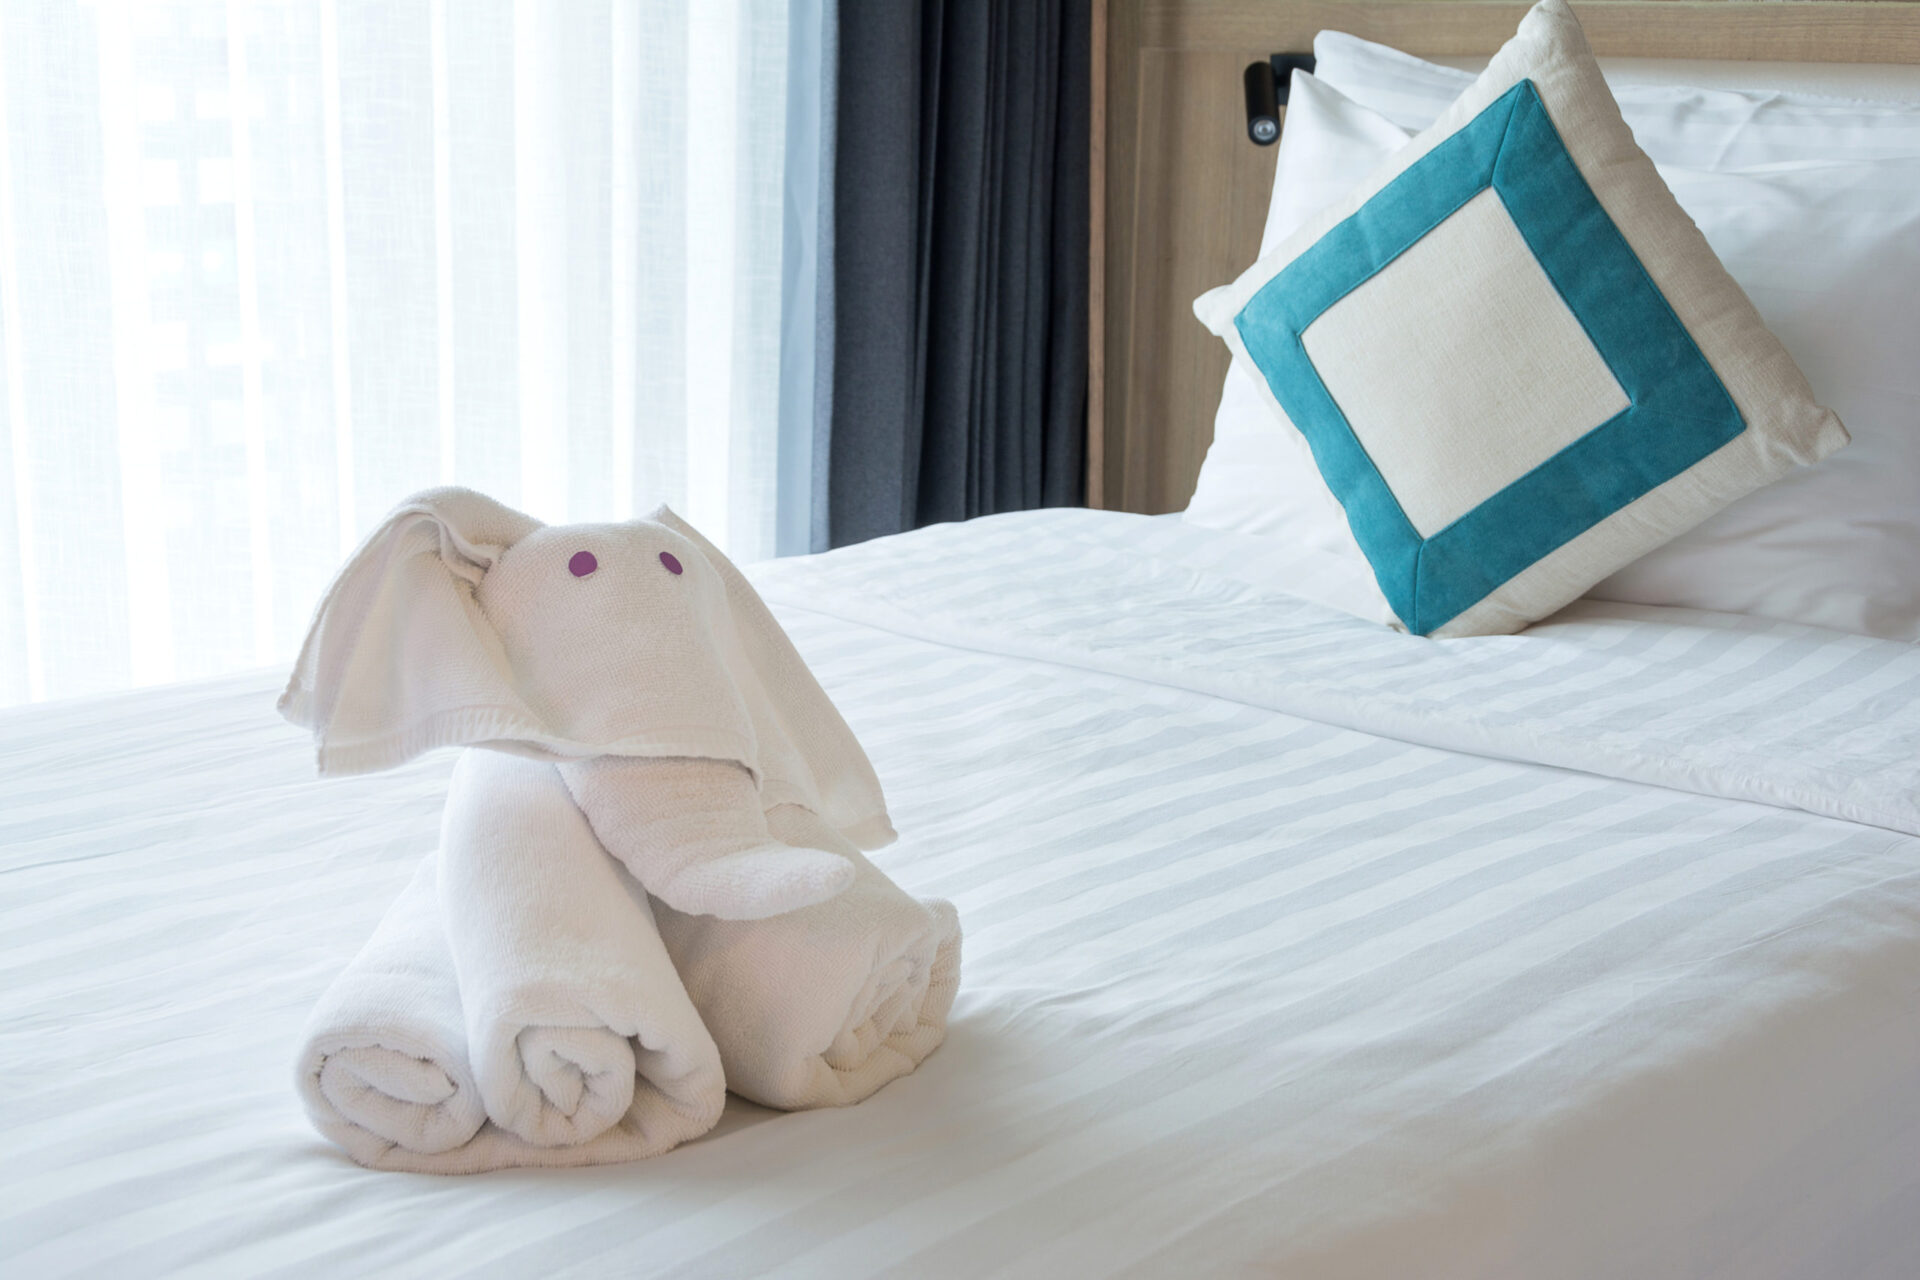 a picture featuring an elephant-shaped towel on a hotel bed.